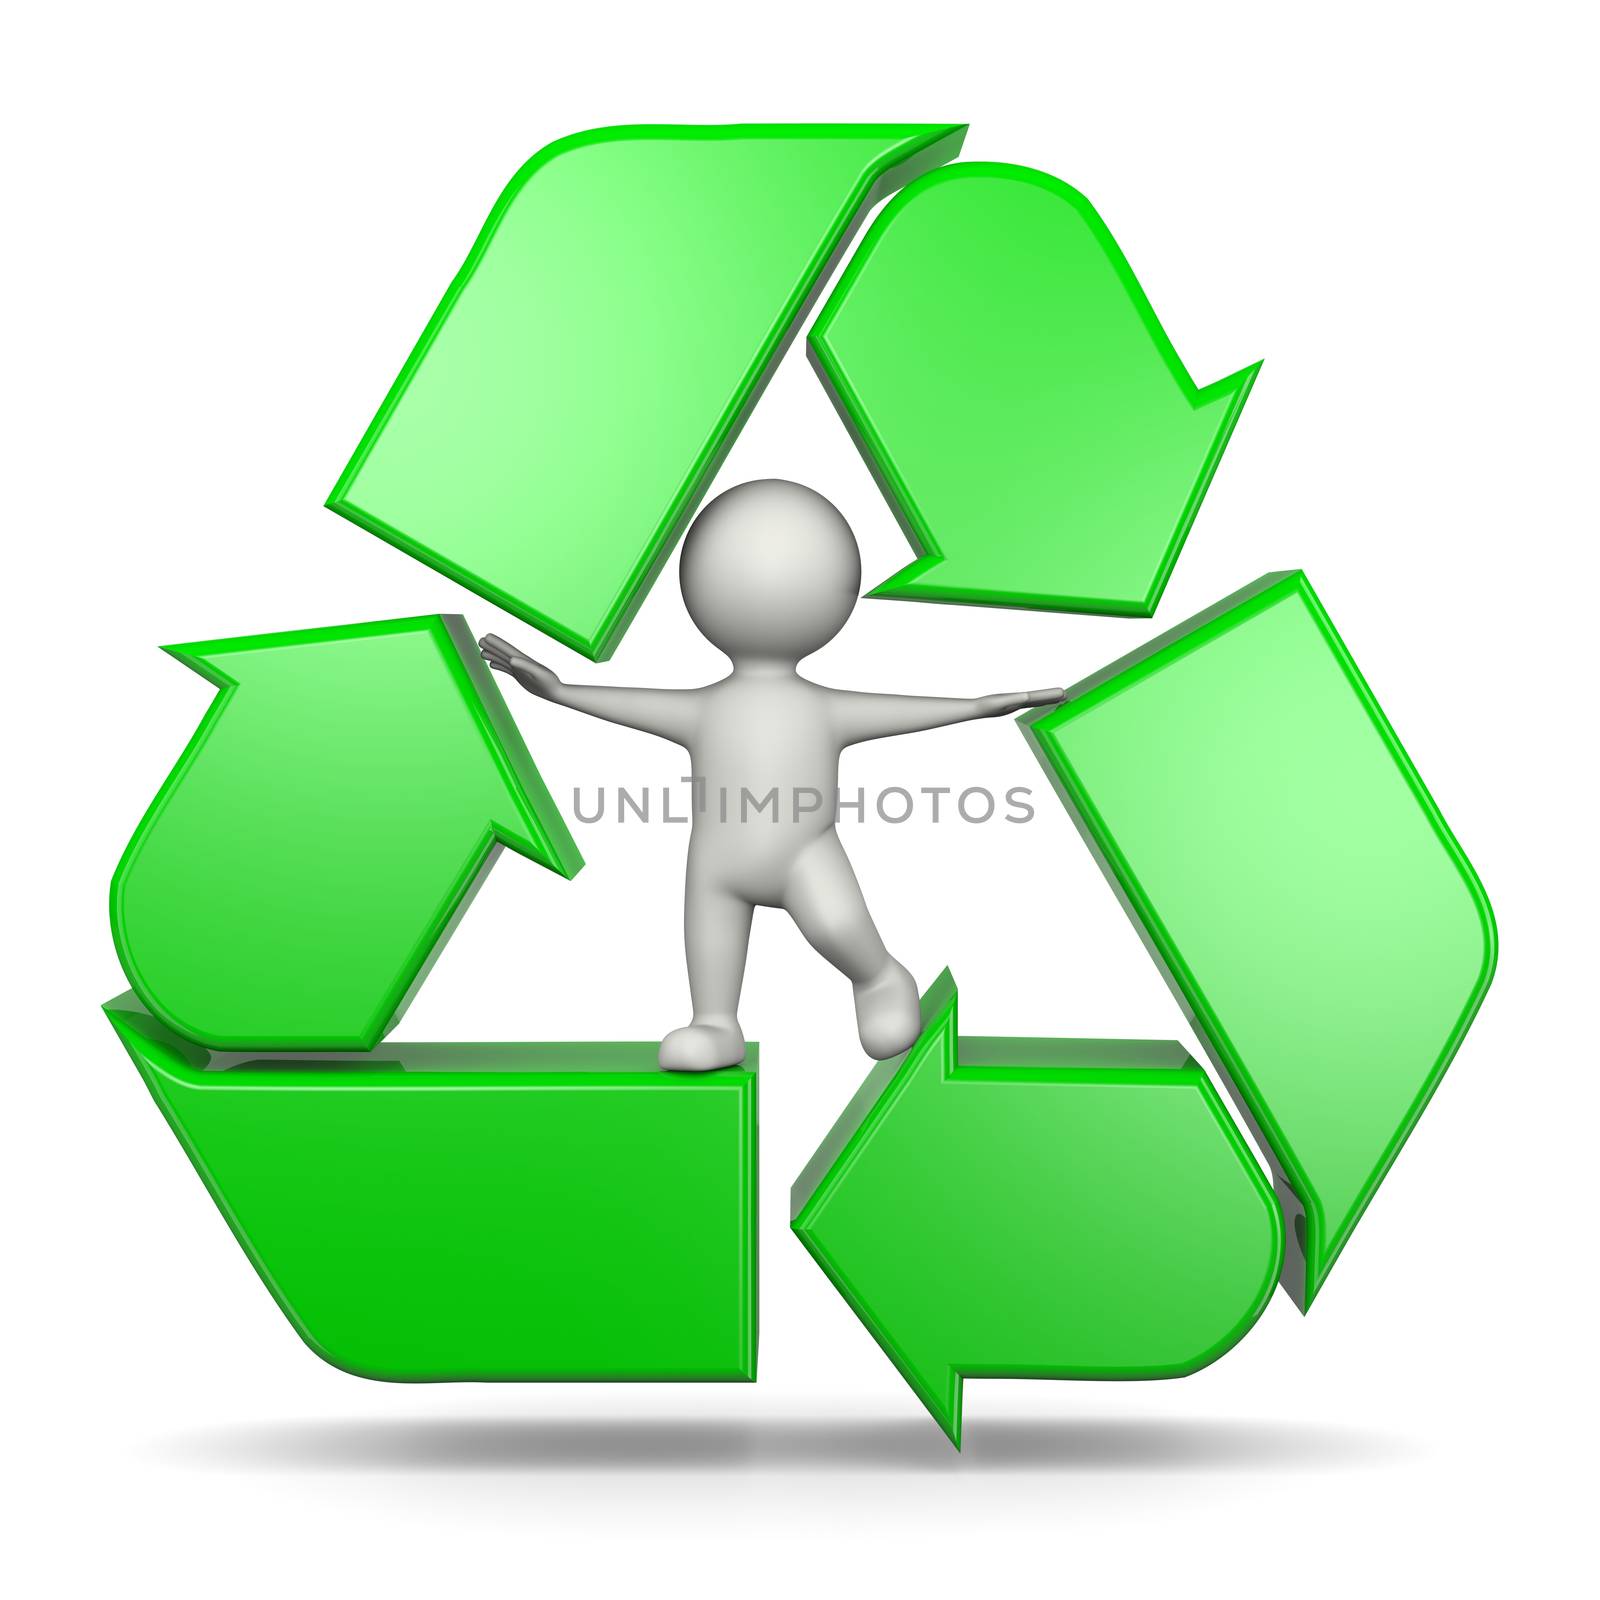 Recycle Sign Arrows with 3D Character on White Background 3D Illustration